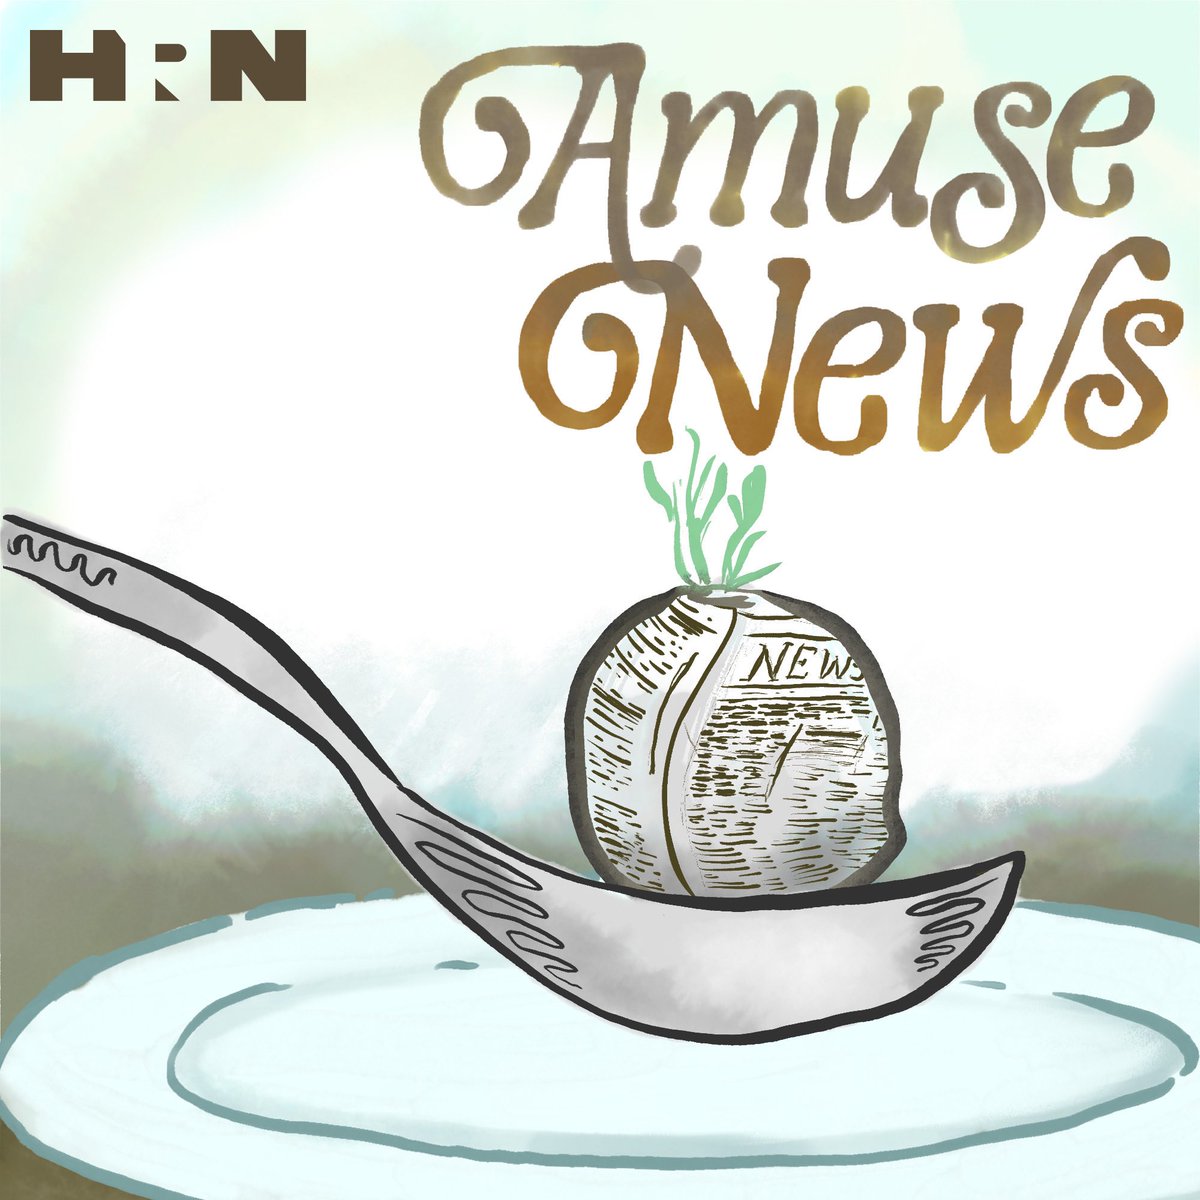 Going live for Amuse News at 9am ET with Basu Ratnam of INDAY! youtube.com/live/efdK-D_yt…